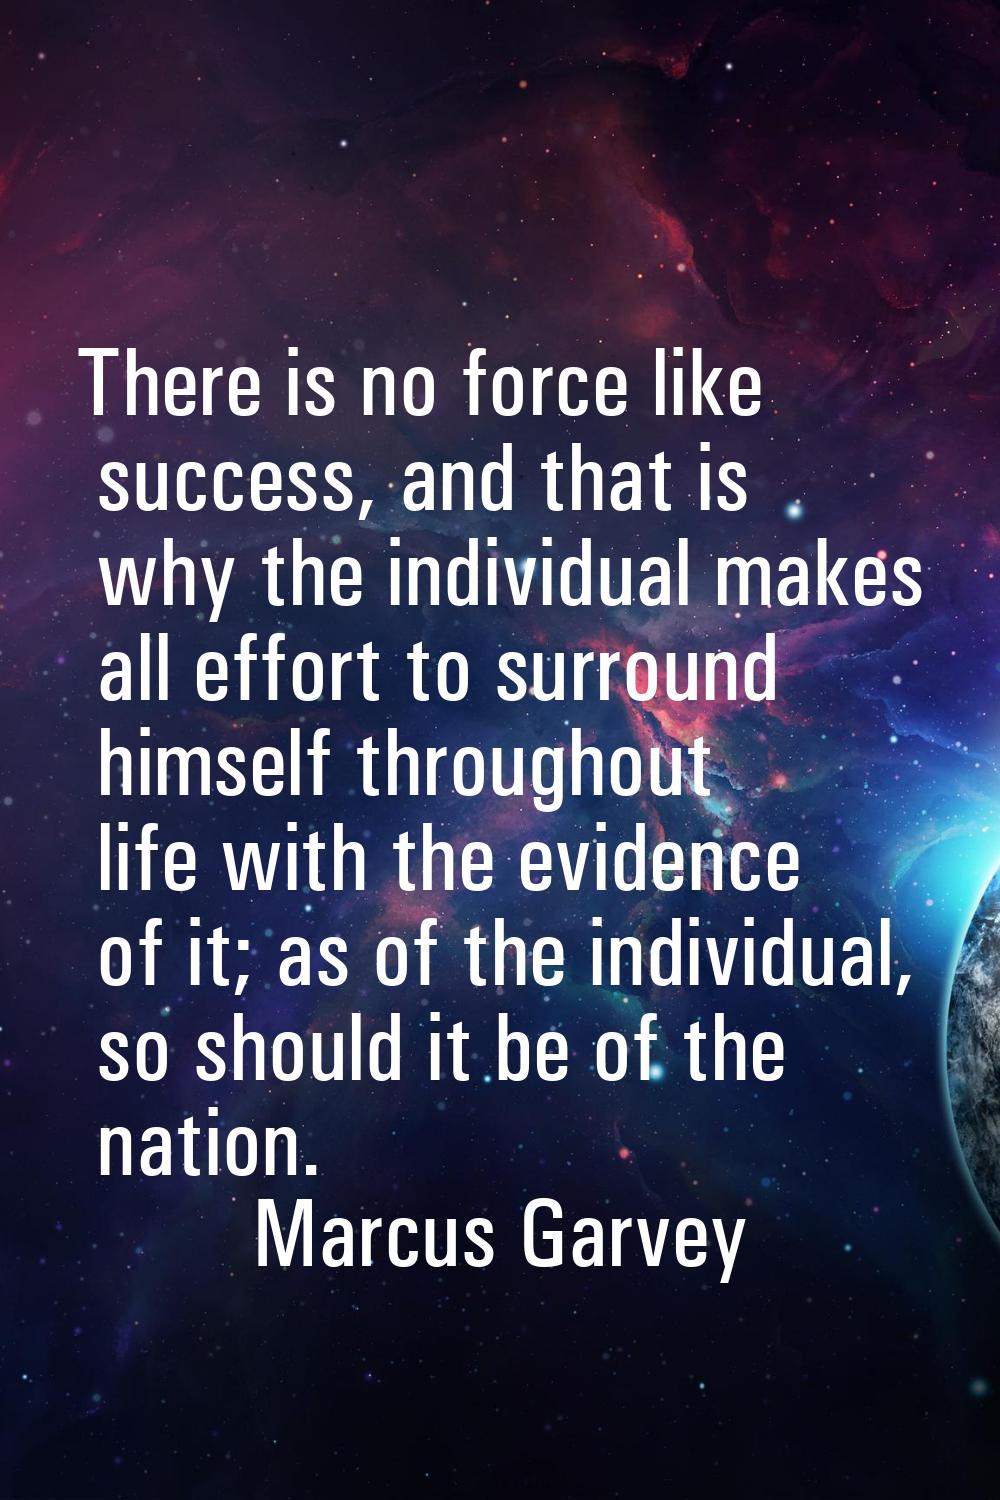 There is no force like success, and that is why the individual makes all effort to surround himself